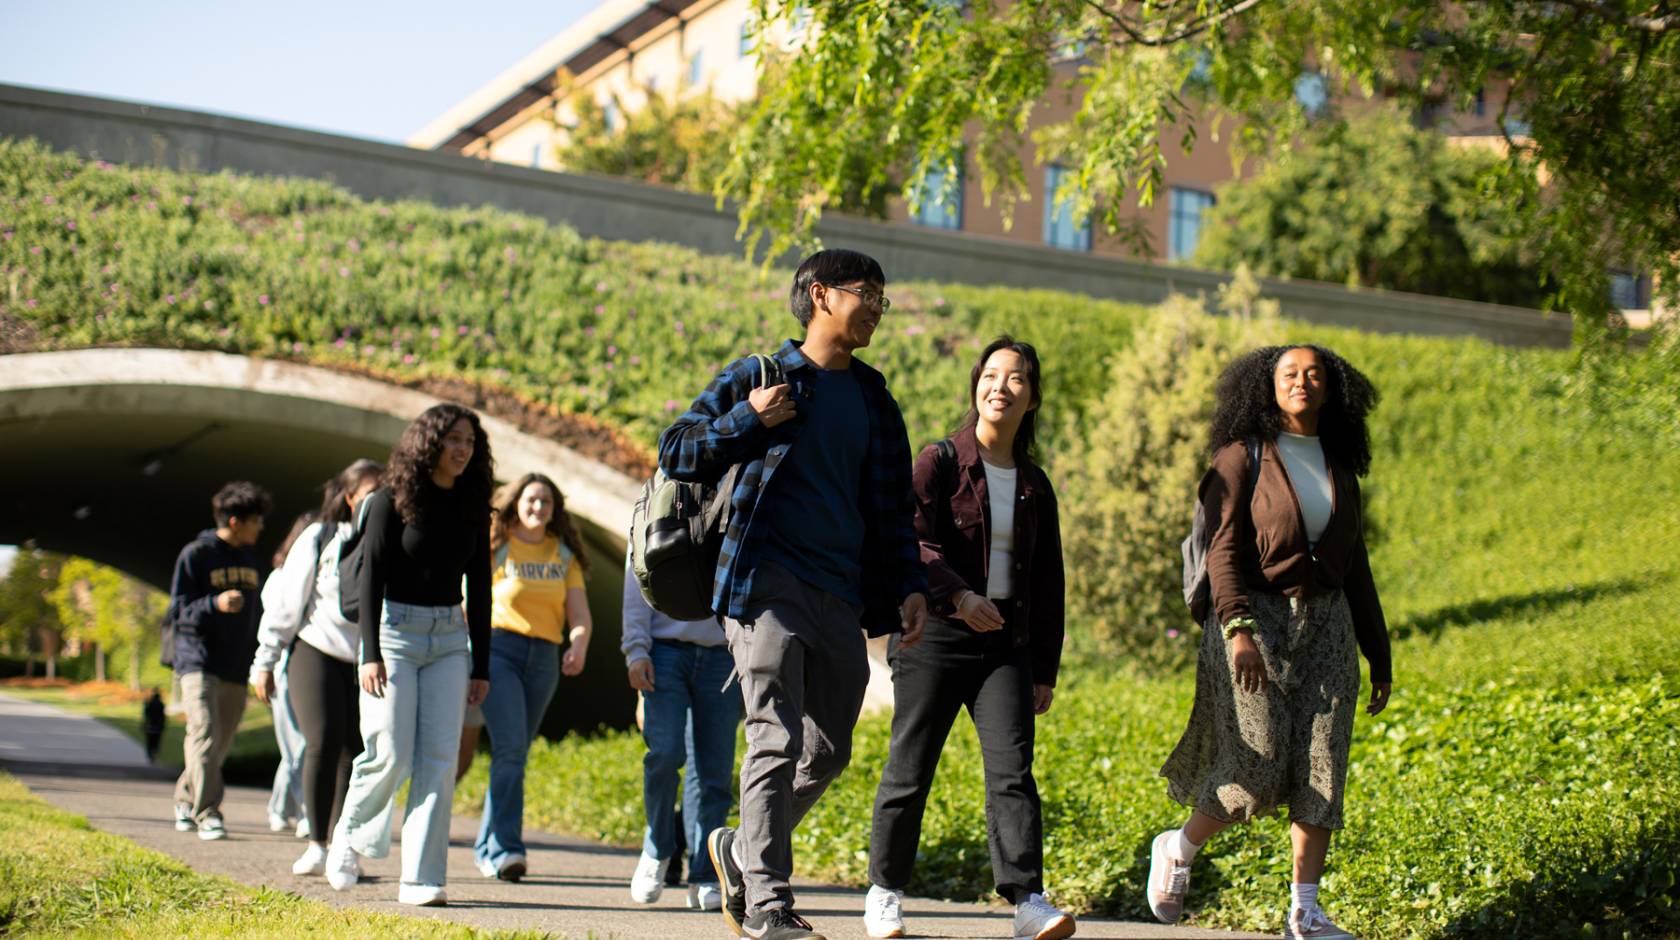 Group of diverse students walking on UC Irvine campus